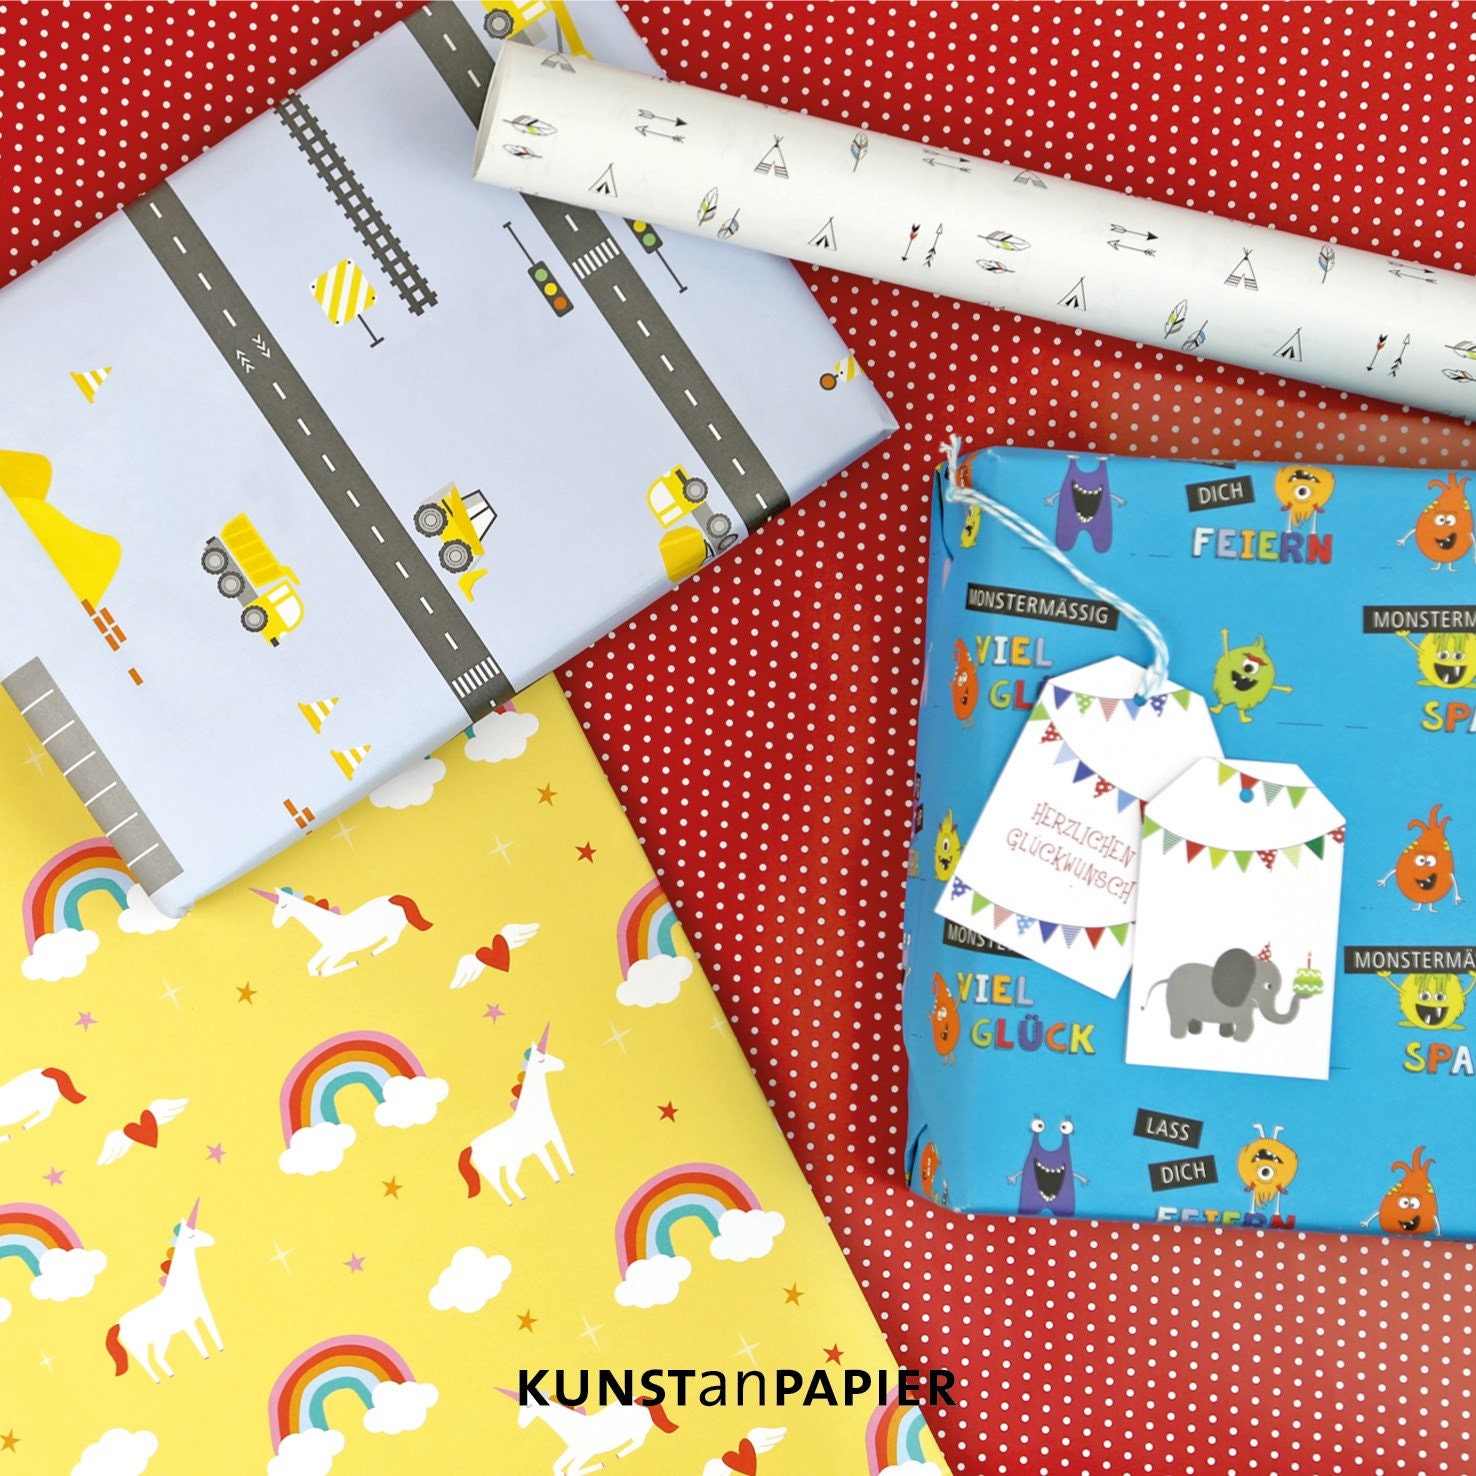 Wrapping Paper Sheet 50 X 70 Cm Construction Site Vehicles Road Excavator  // Wrapping Paper Sheet Bob 